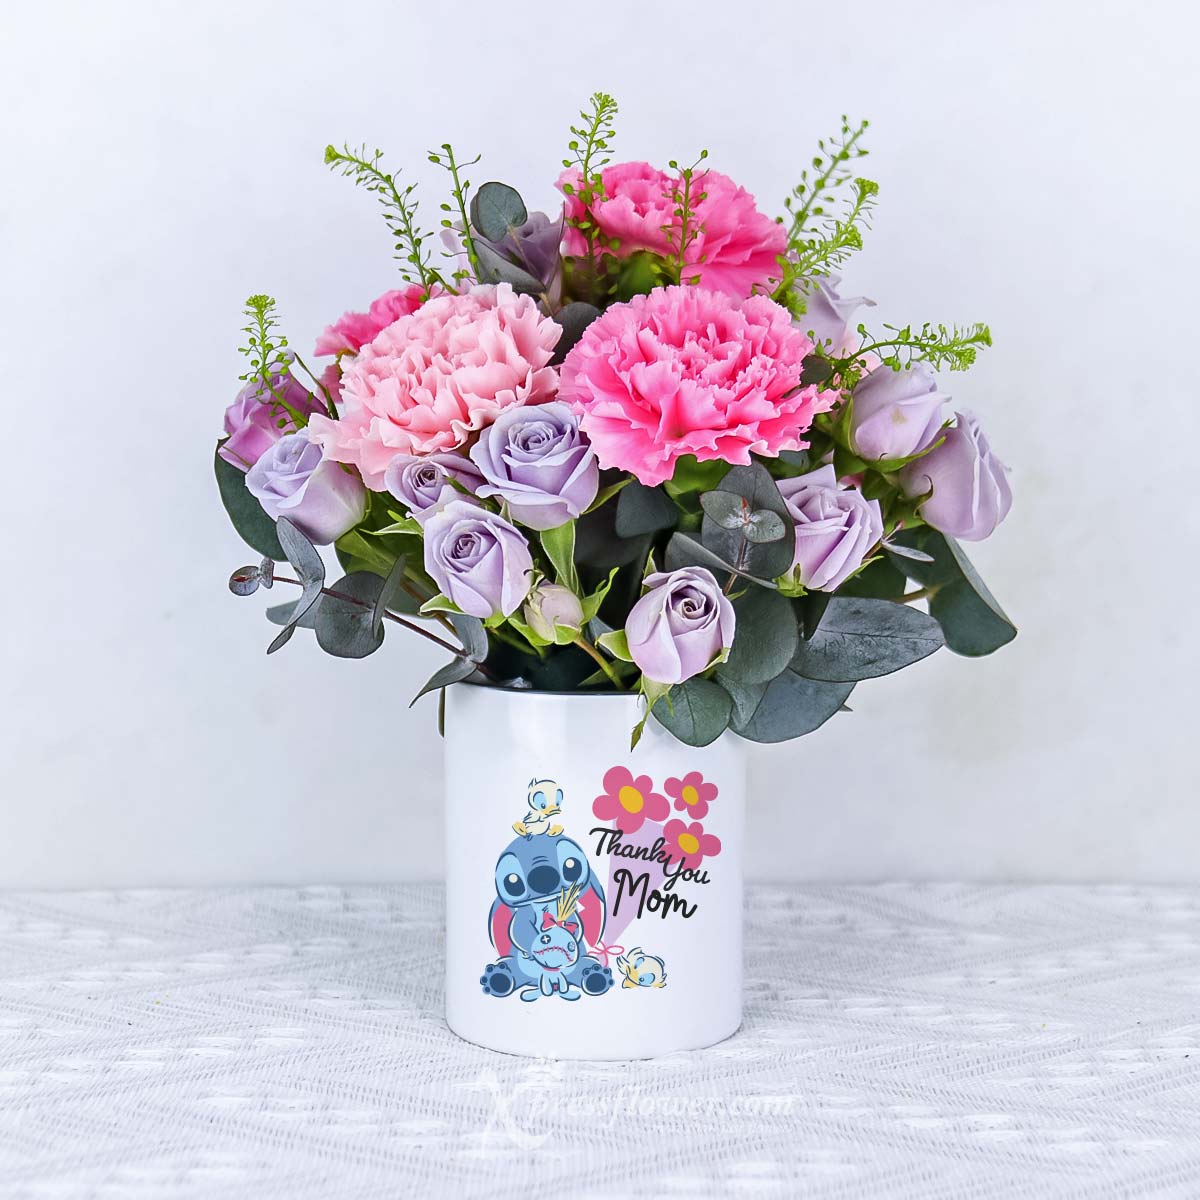 Floral Harmony (6 Mix Pink Carnations with Disney Stitch "Thank You Mom" holder)